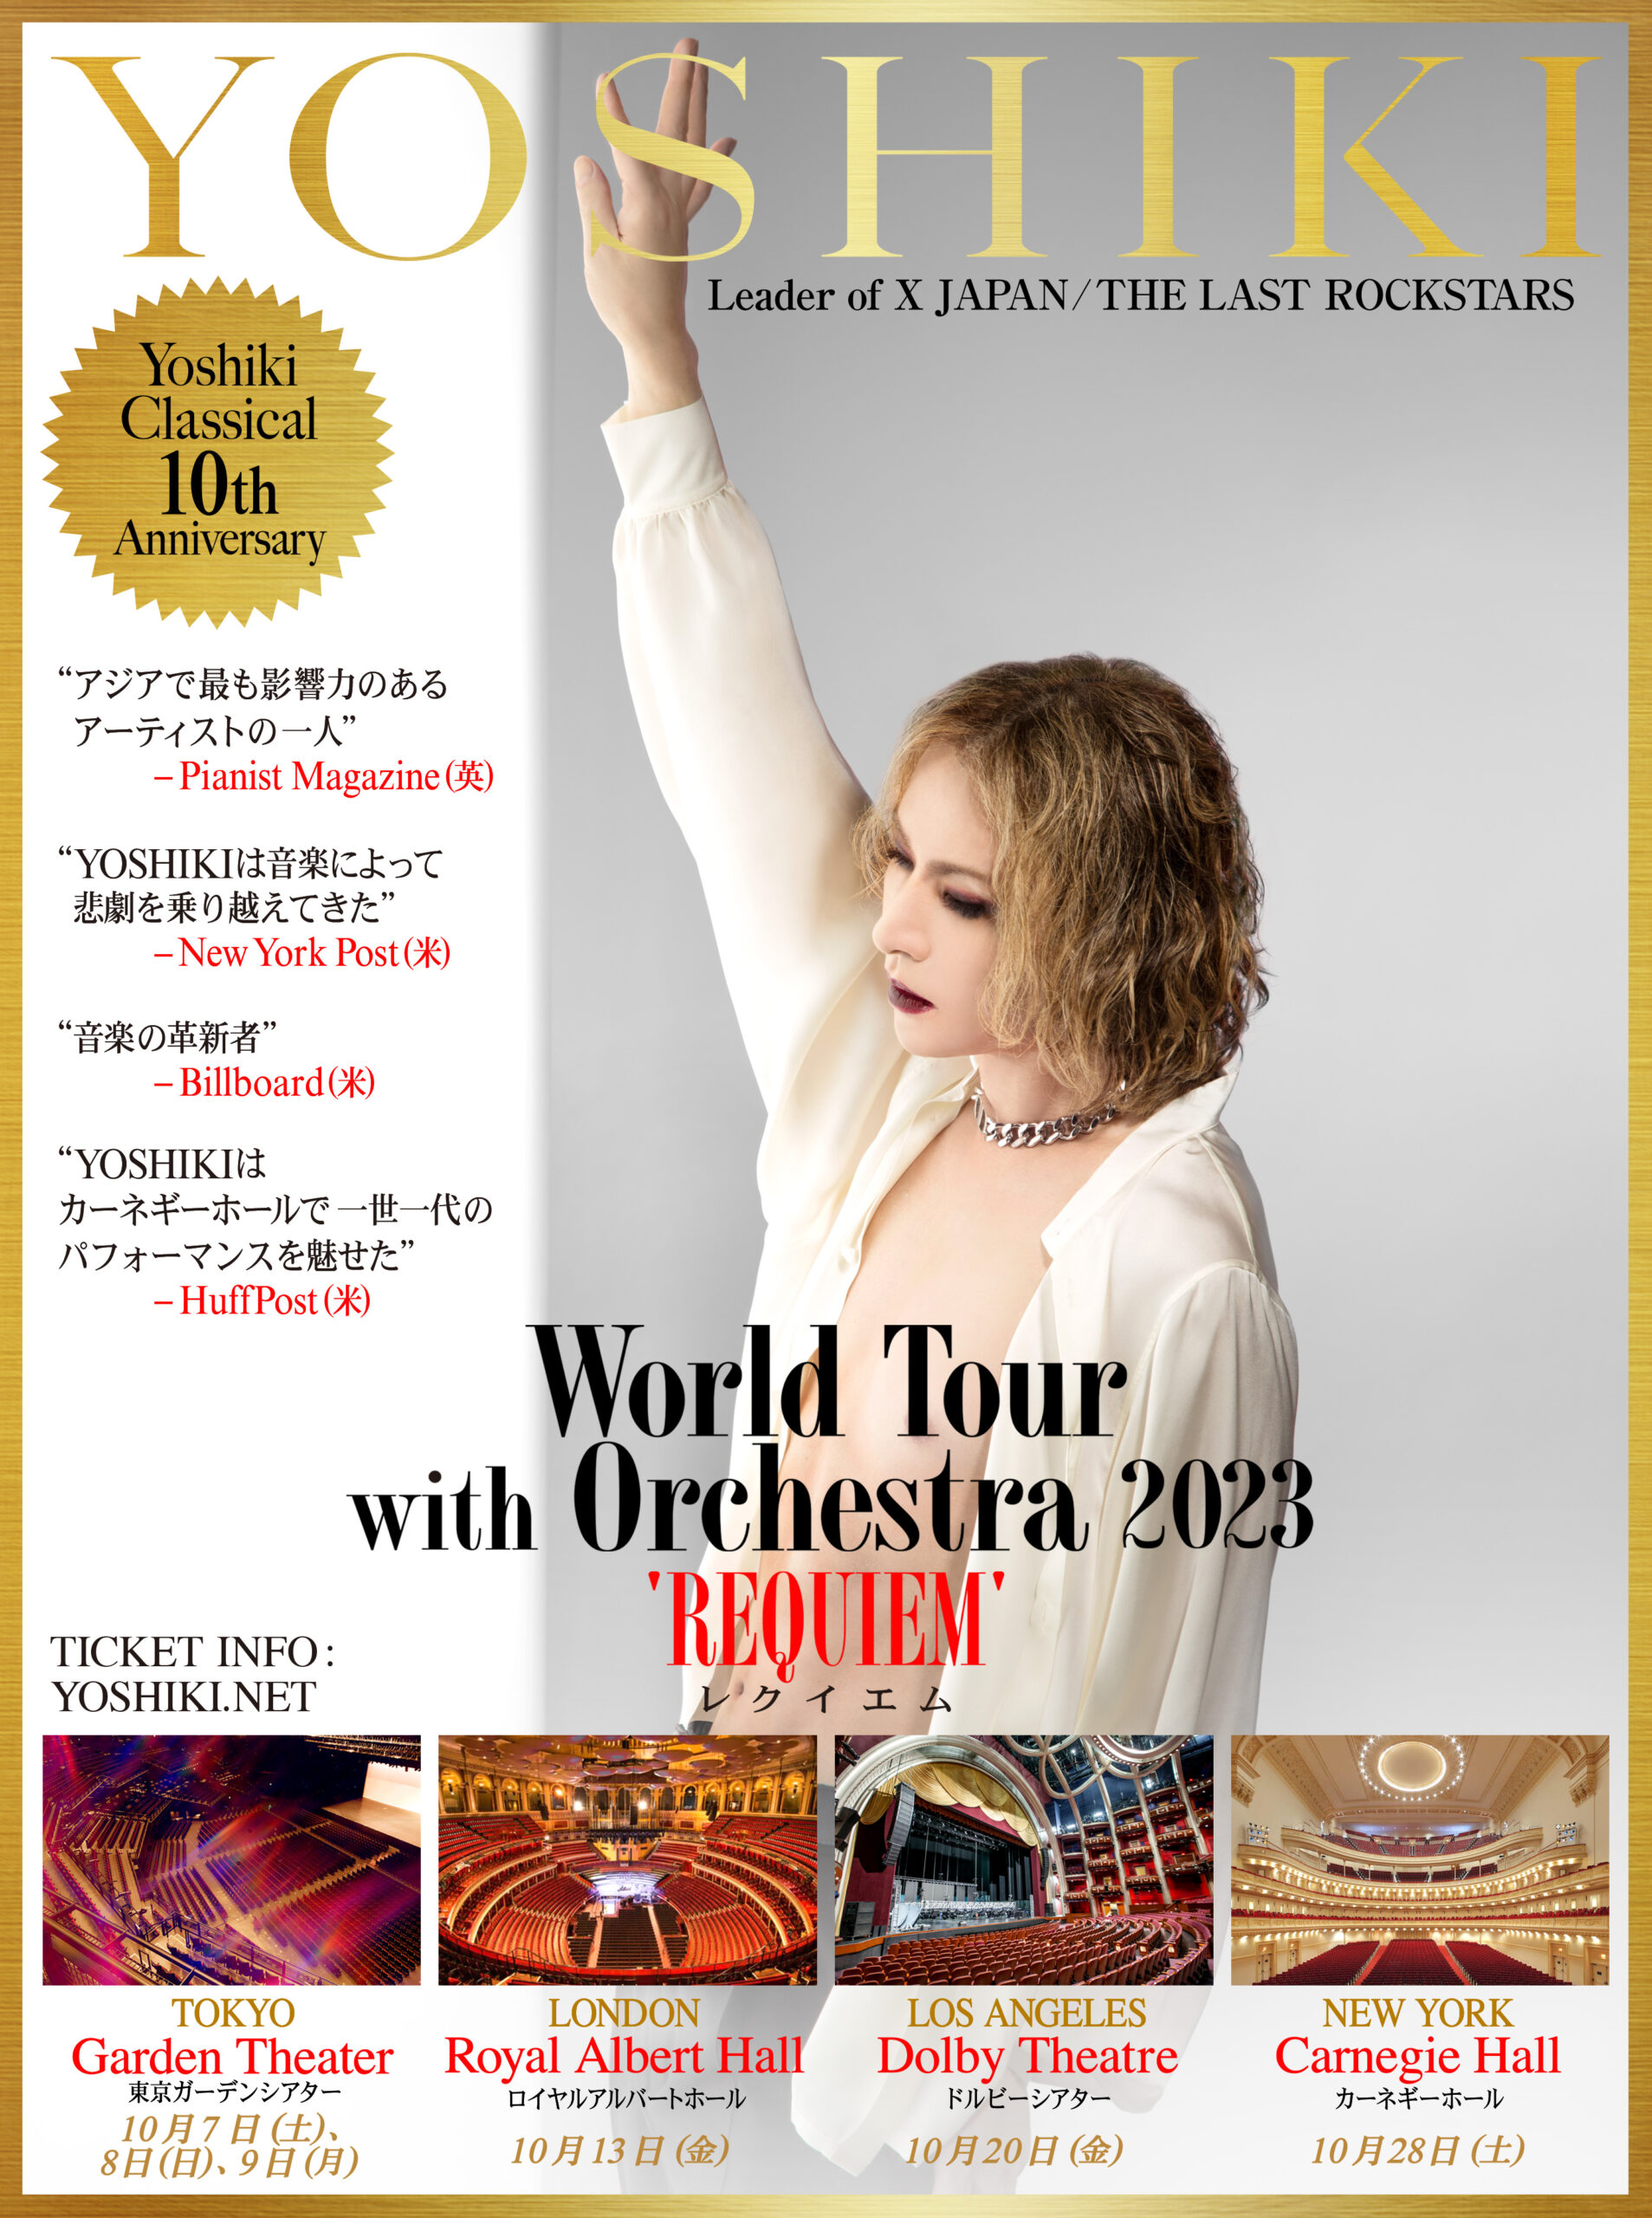 YOSHIKI CLASSICAL 10th Anniversary World Tour with Orchestra